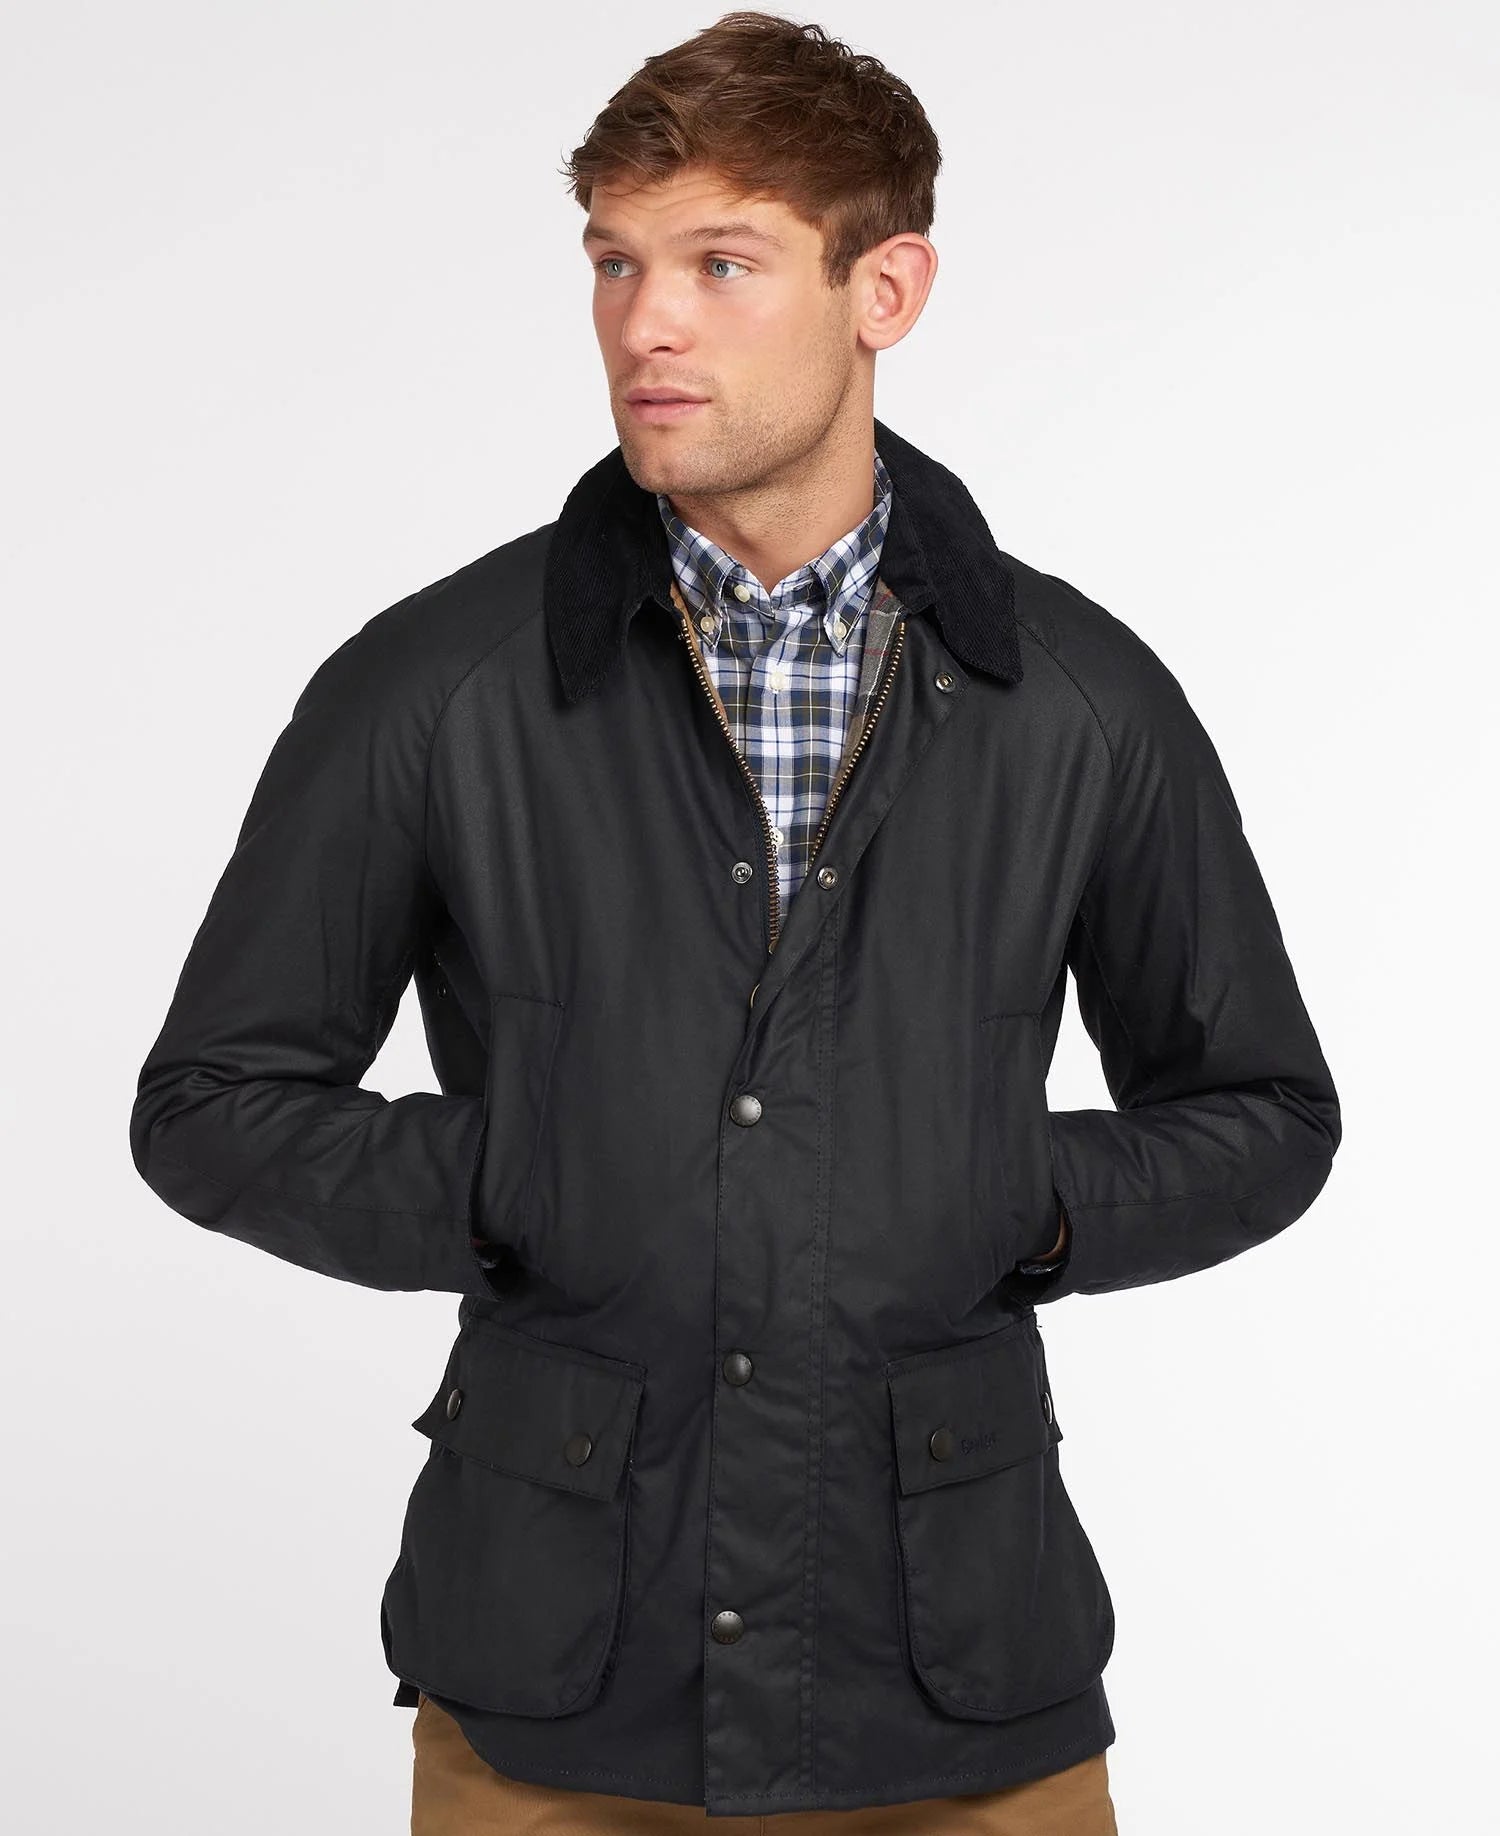 Barbour Ashby Wax Jacket NY92